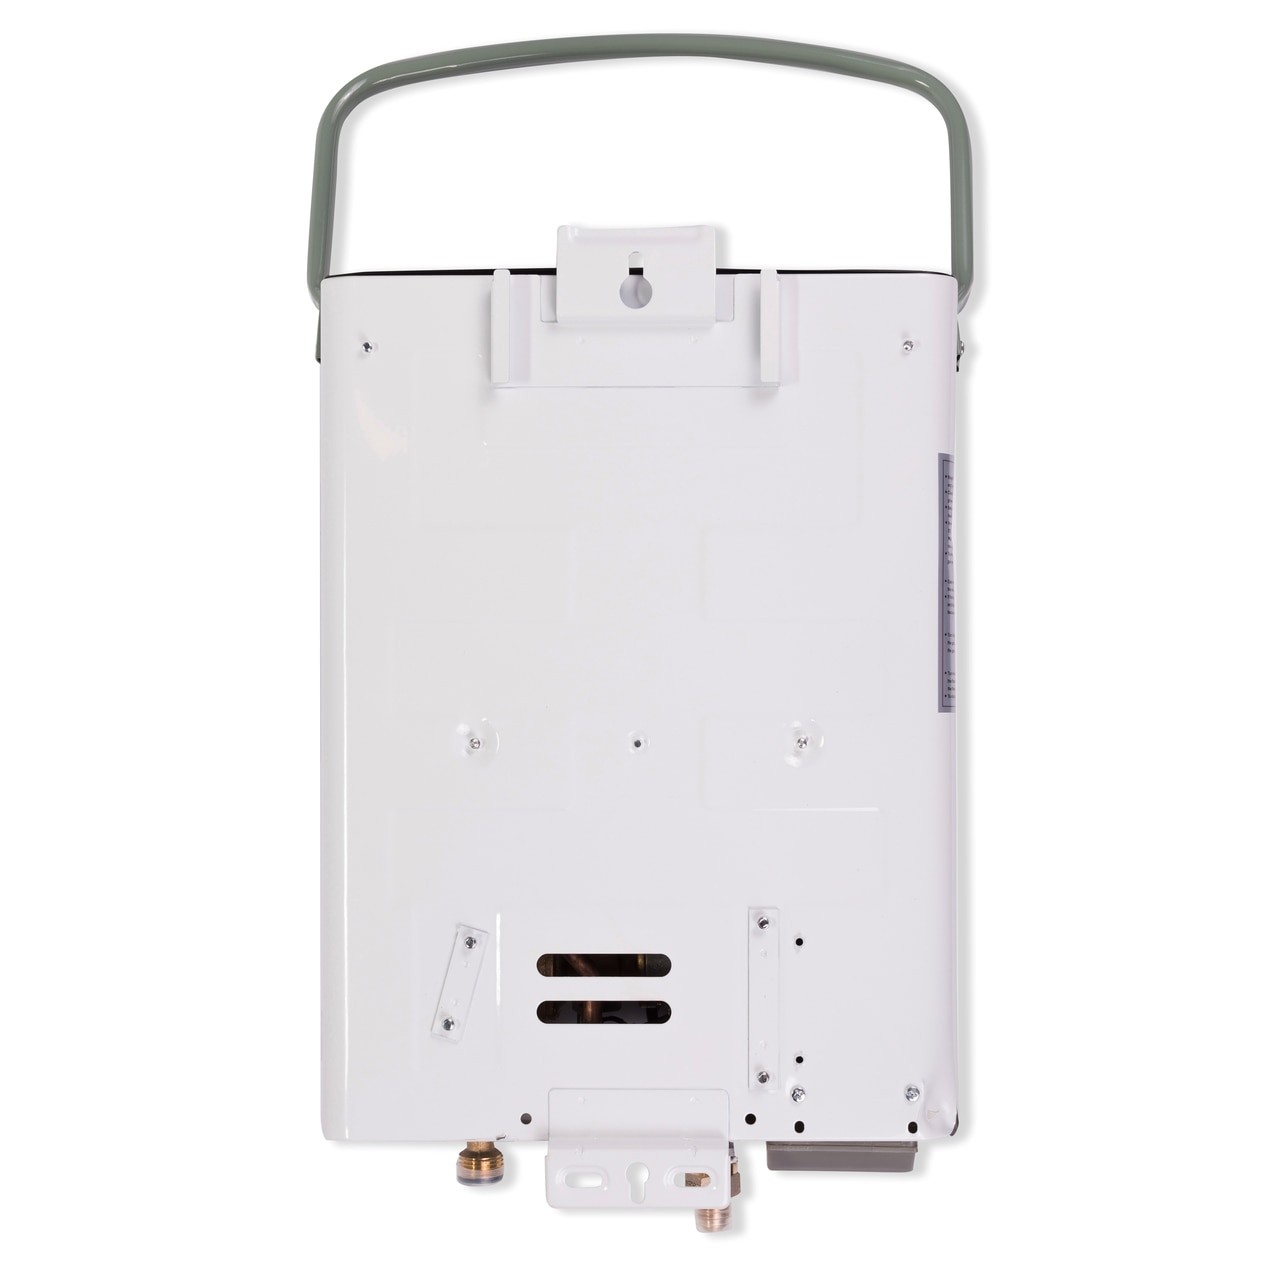 Eccotemp L5 Portable Tankless Water Heater Back View to enlarge